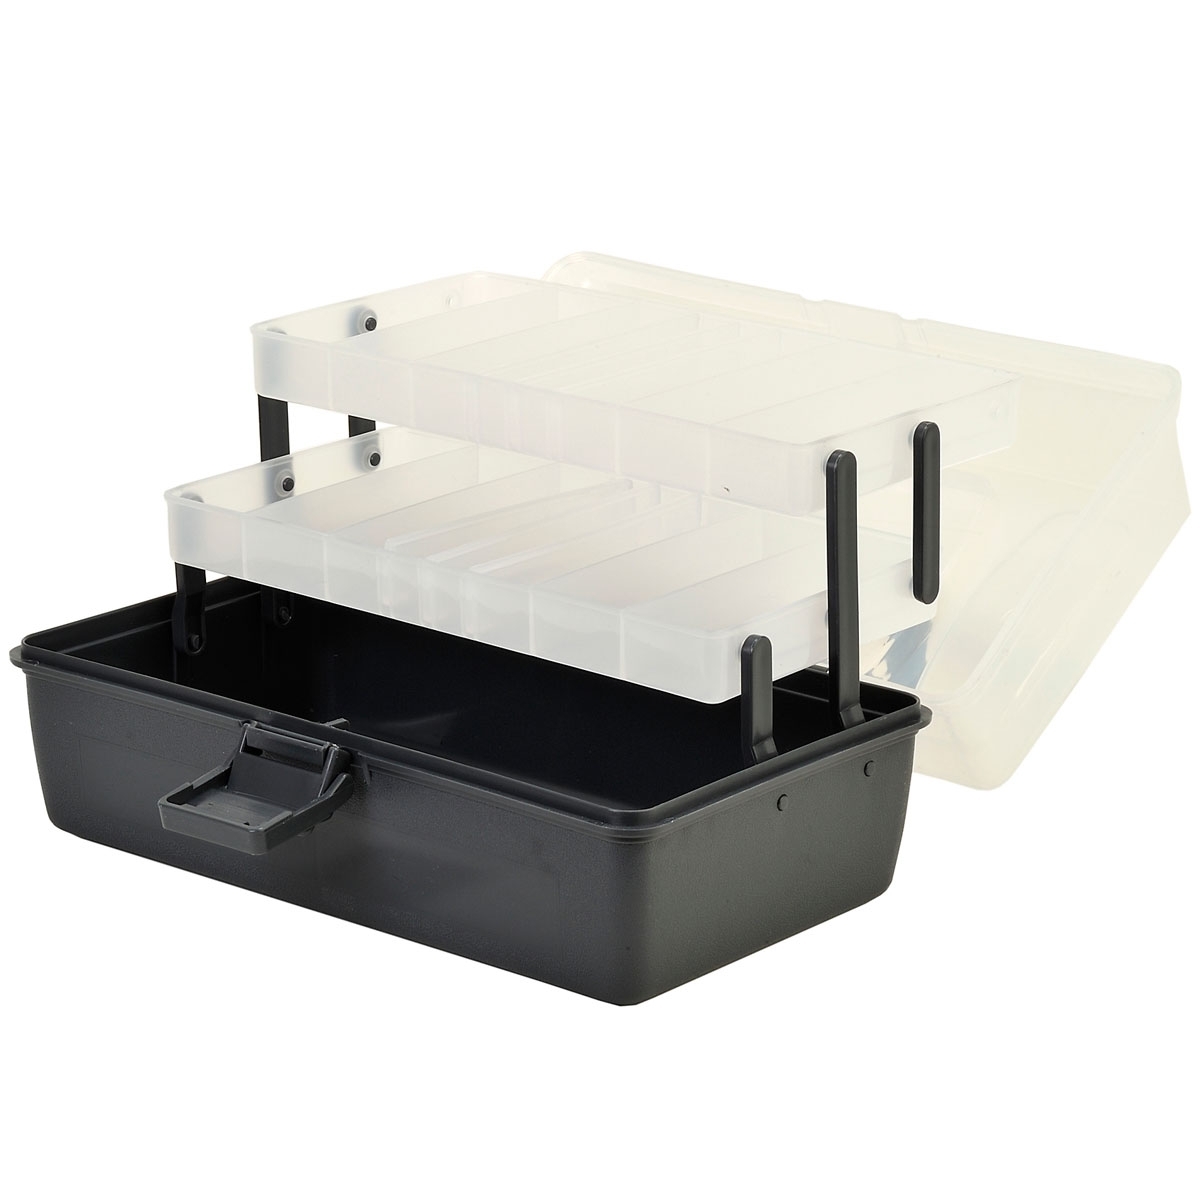 https://cdn.anglingactive.co.uk/media/catalog/product/cache/c7a5695839b539f20c8015776a05748c/s/h/shakespeare_cantilever_tackle_boxes_-_fishing_storage-black-2tray.jpg